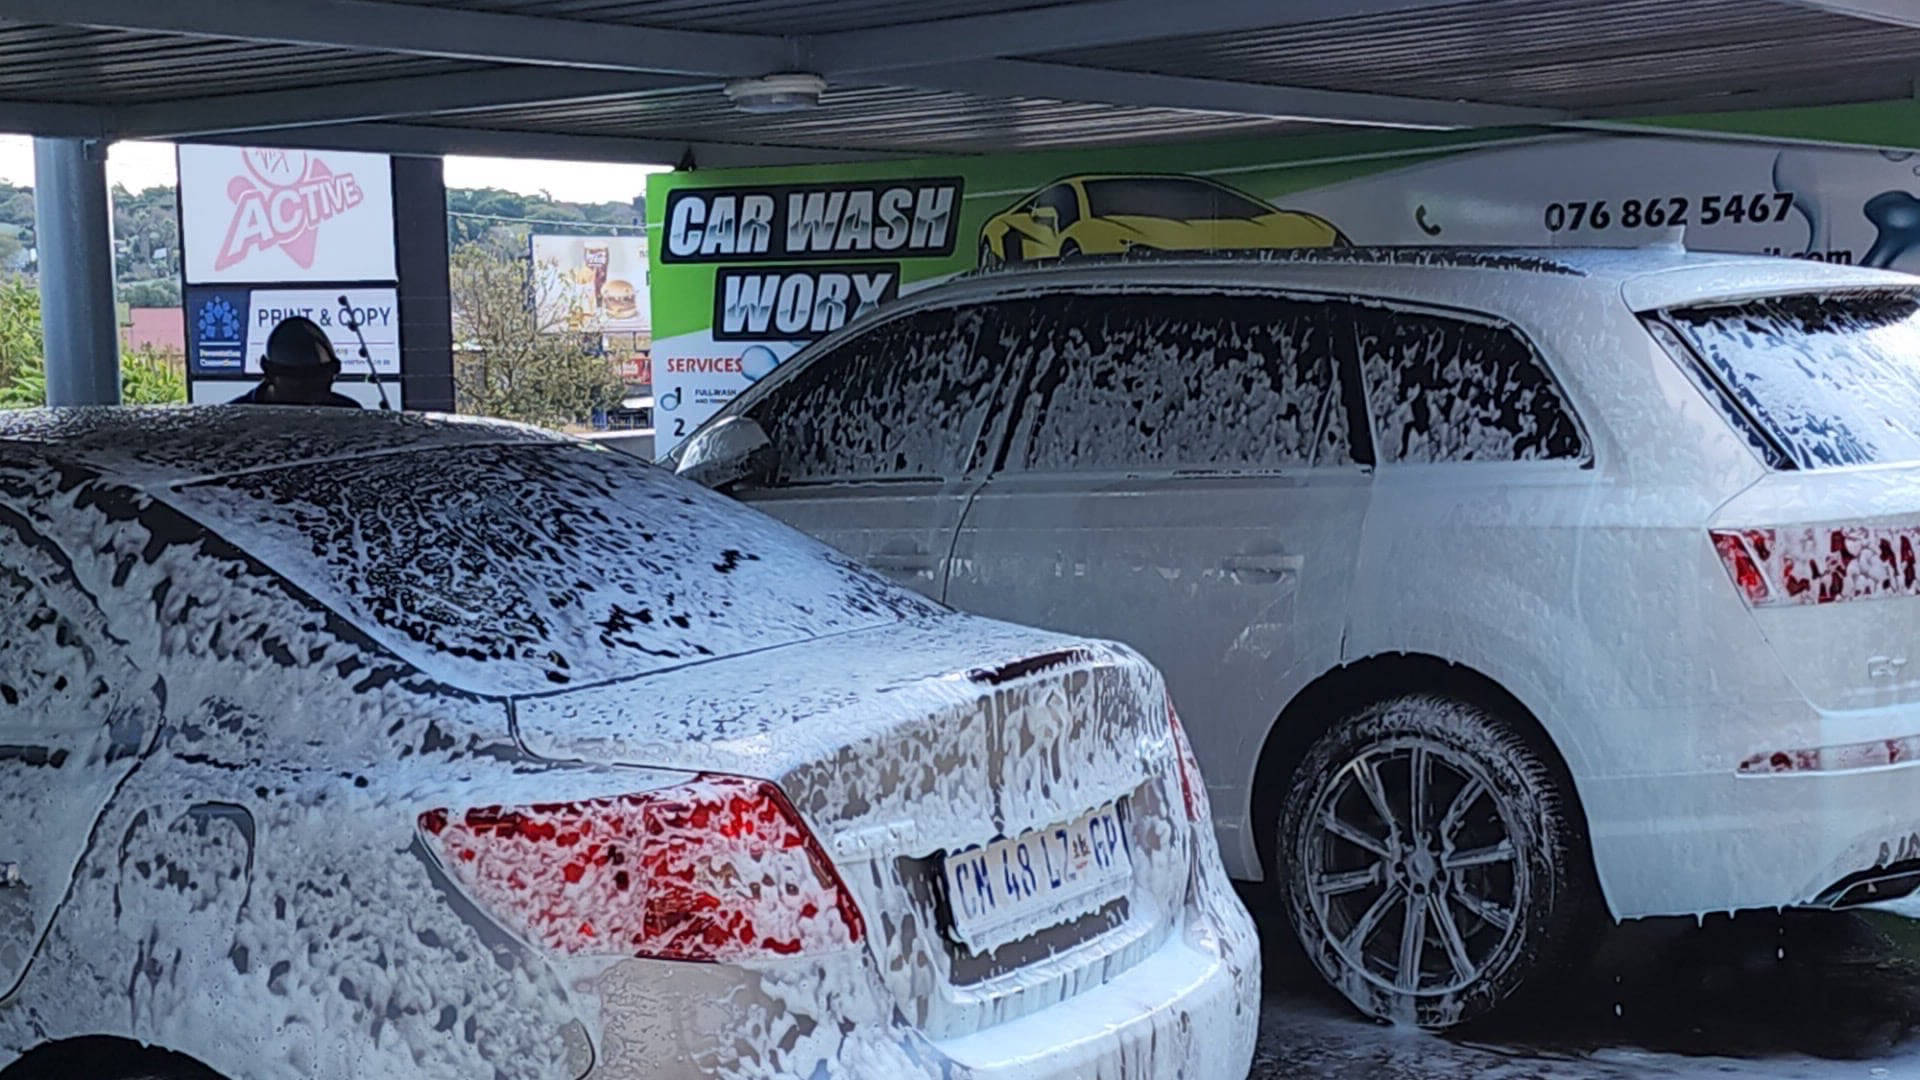 CarWash Worx Milpark Mews Branch, Car Wash Franchises Available, CarWash Worx Head Office, Join The Leading Car Wash Franchising Group, Start Your Own Successful Car Wash Business Now